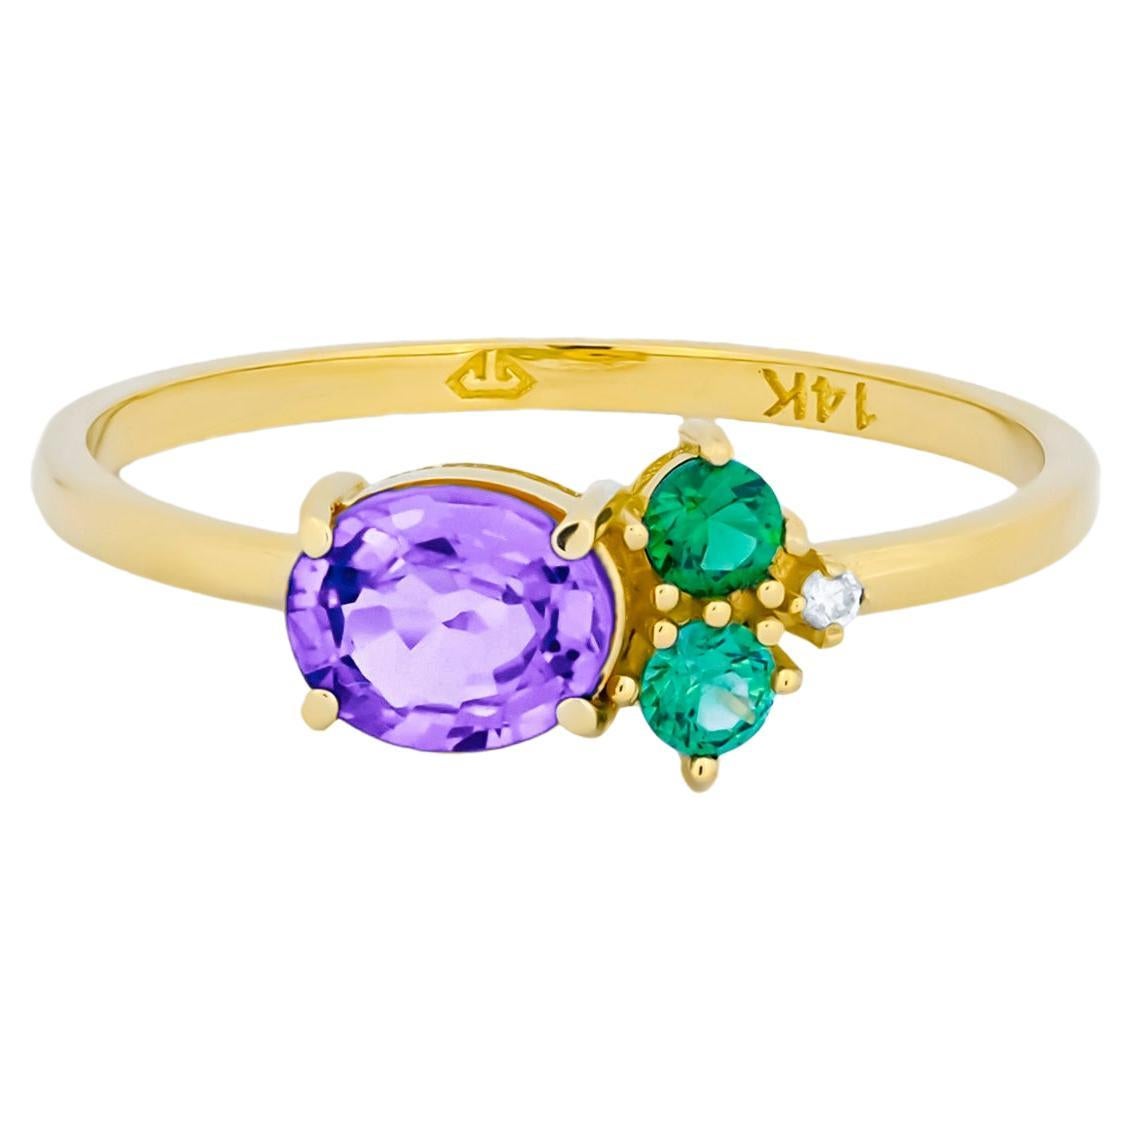 For Sale:  Oval amethyst, tsavorite and diamonds 14k gold ring.